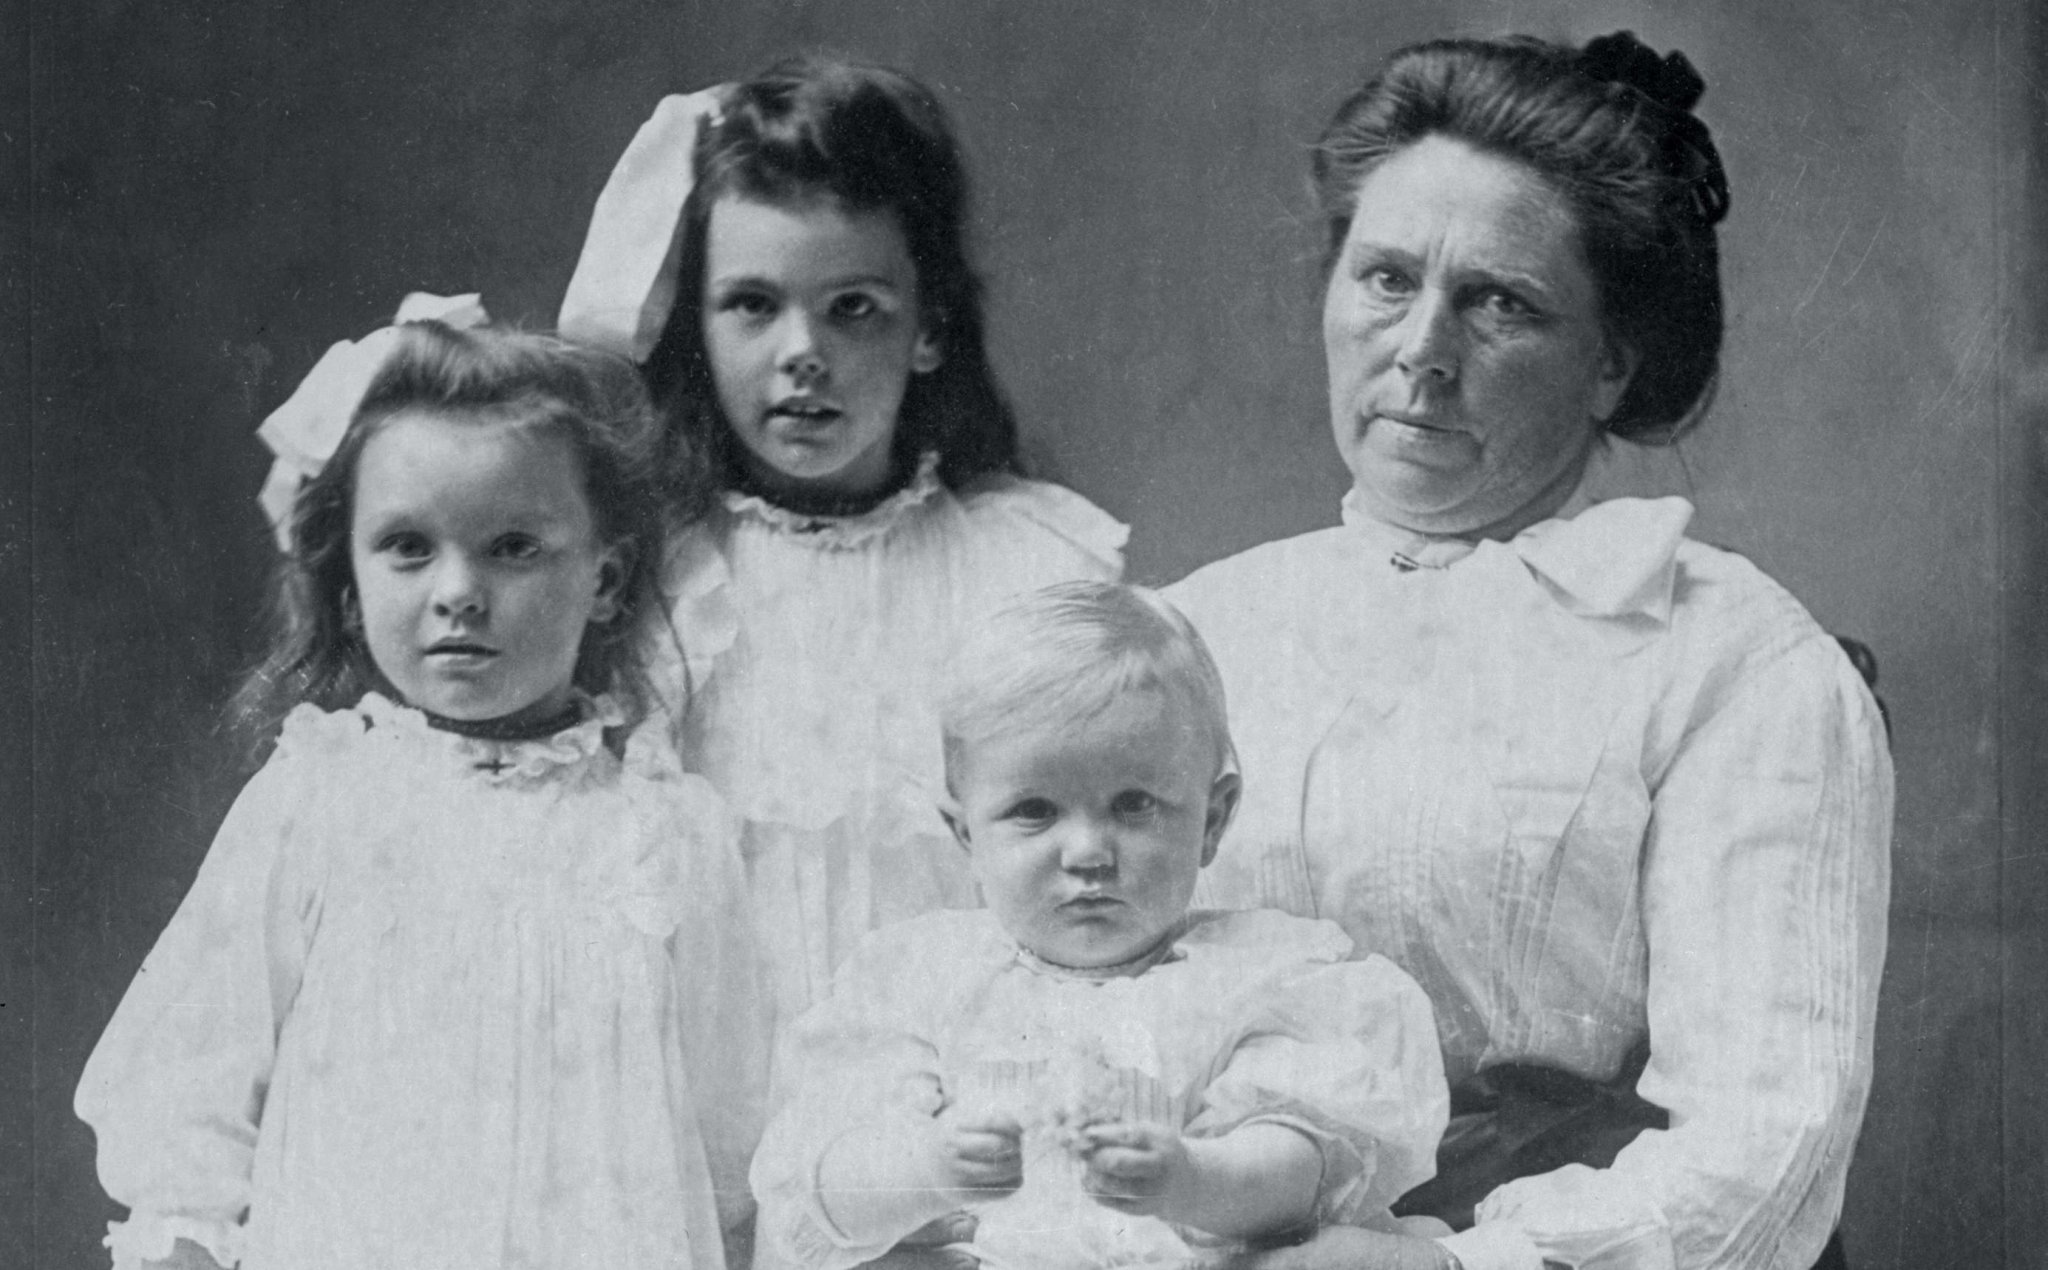 'Triflers Need Not Apply': The story of deadly Belle Gunness